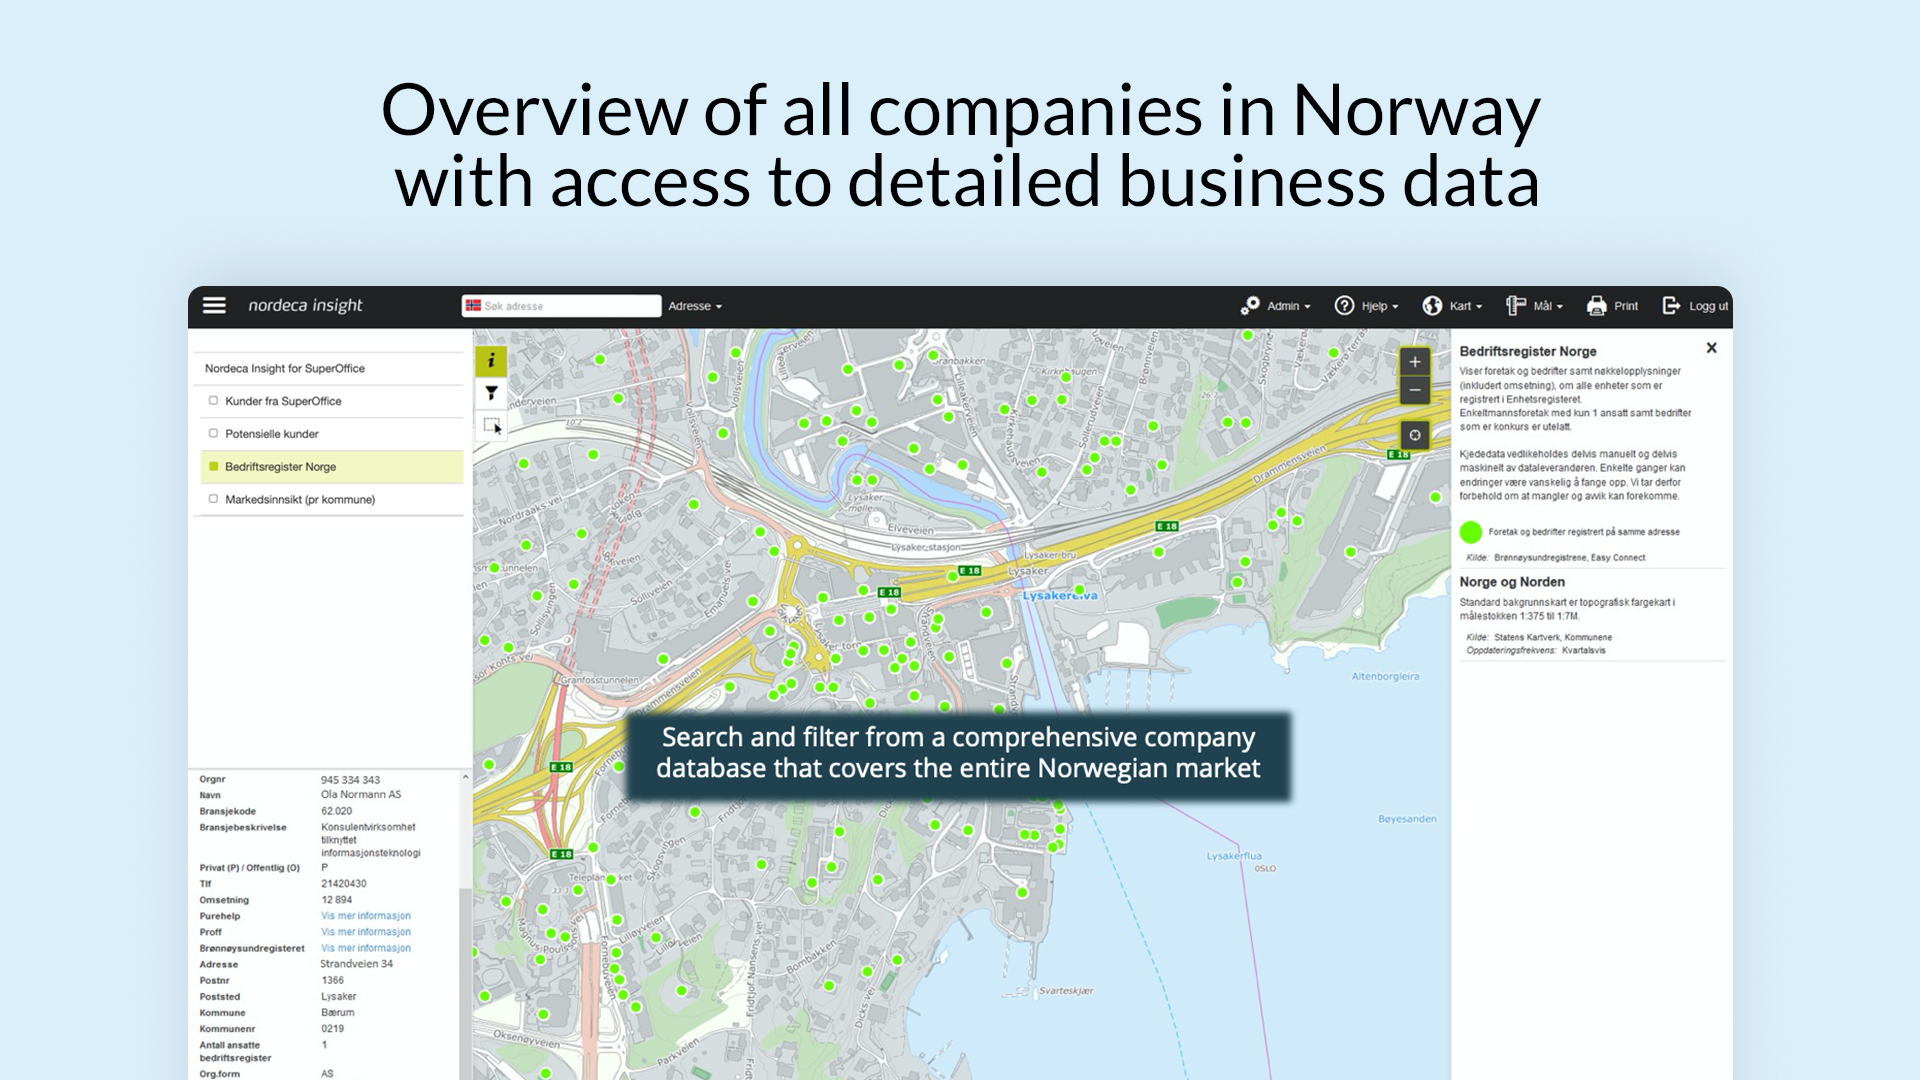 Overview of all companies in Norway with access to detailed business data